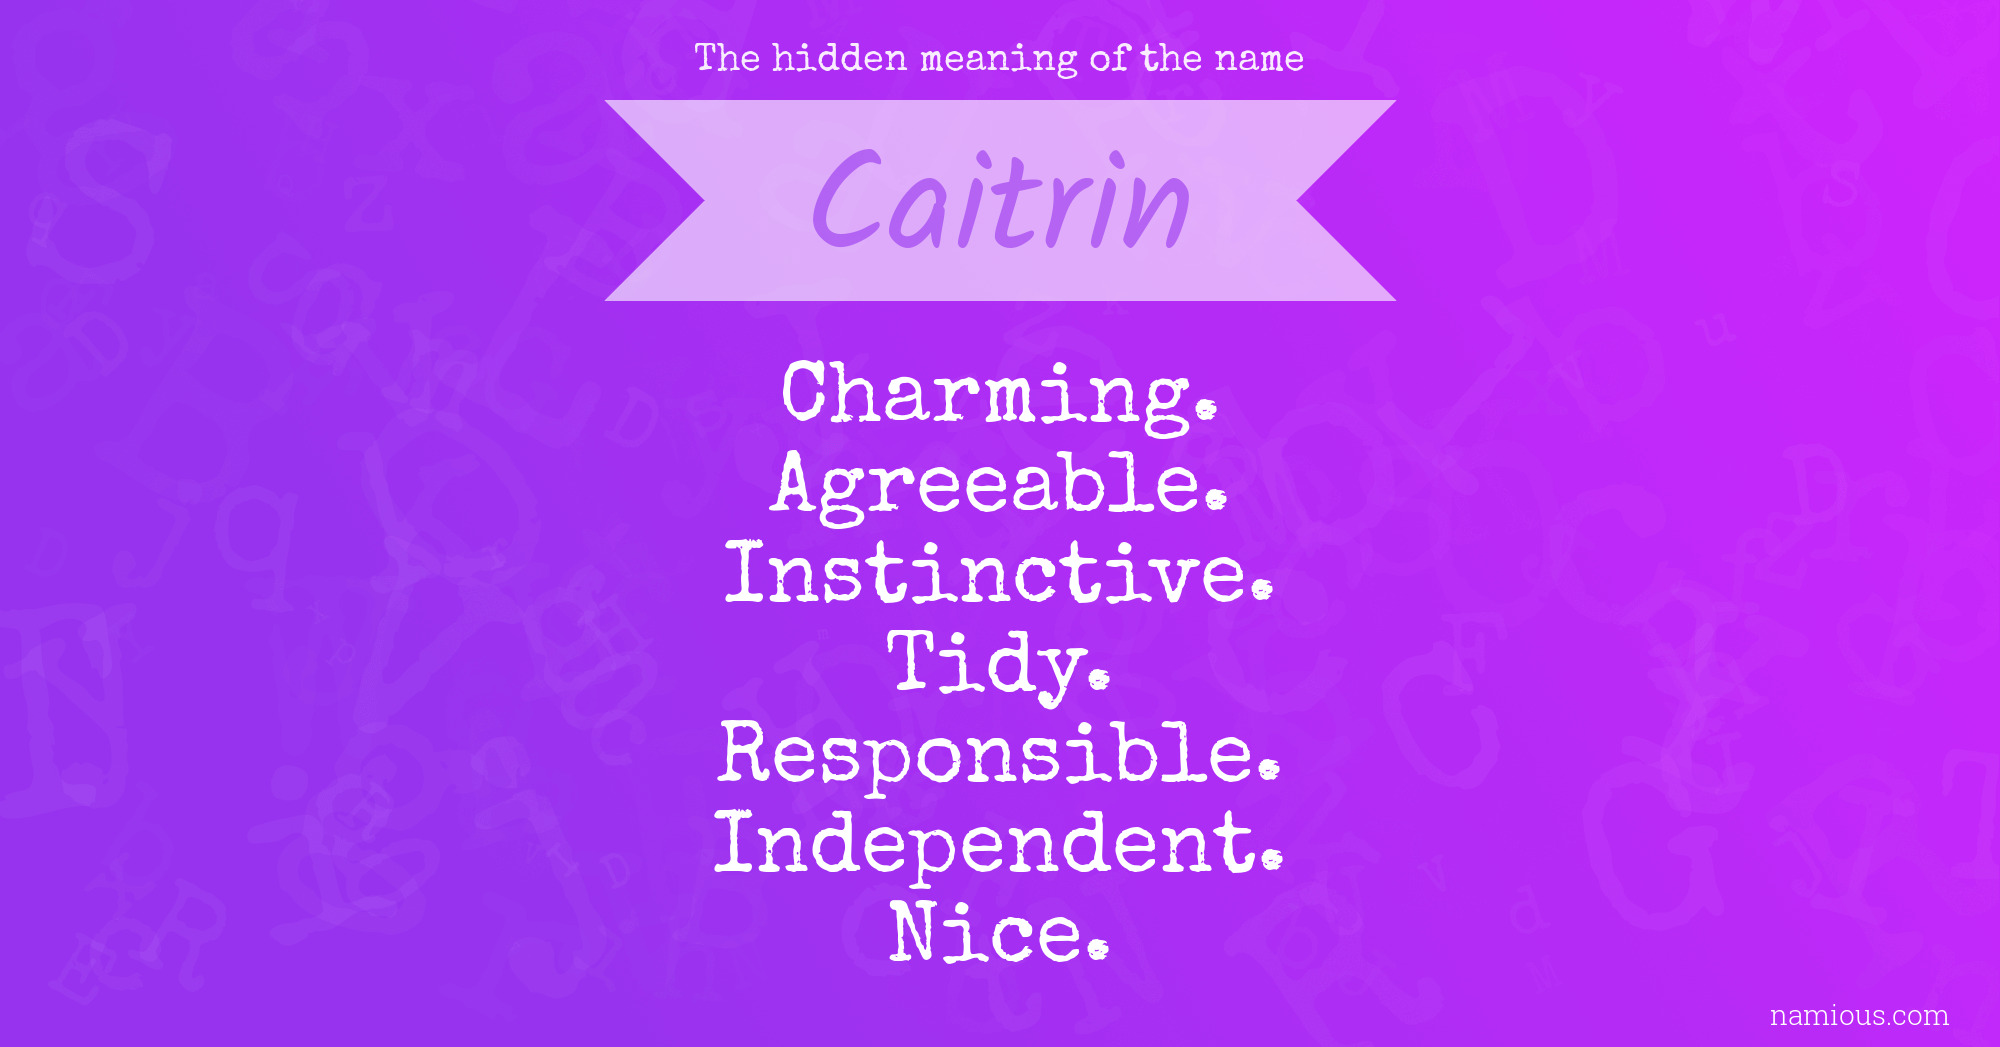 The hidden meaning of the name Caitrin